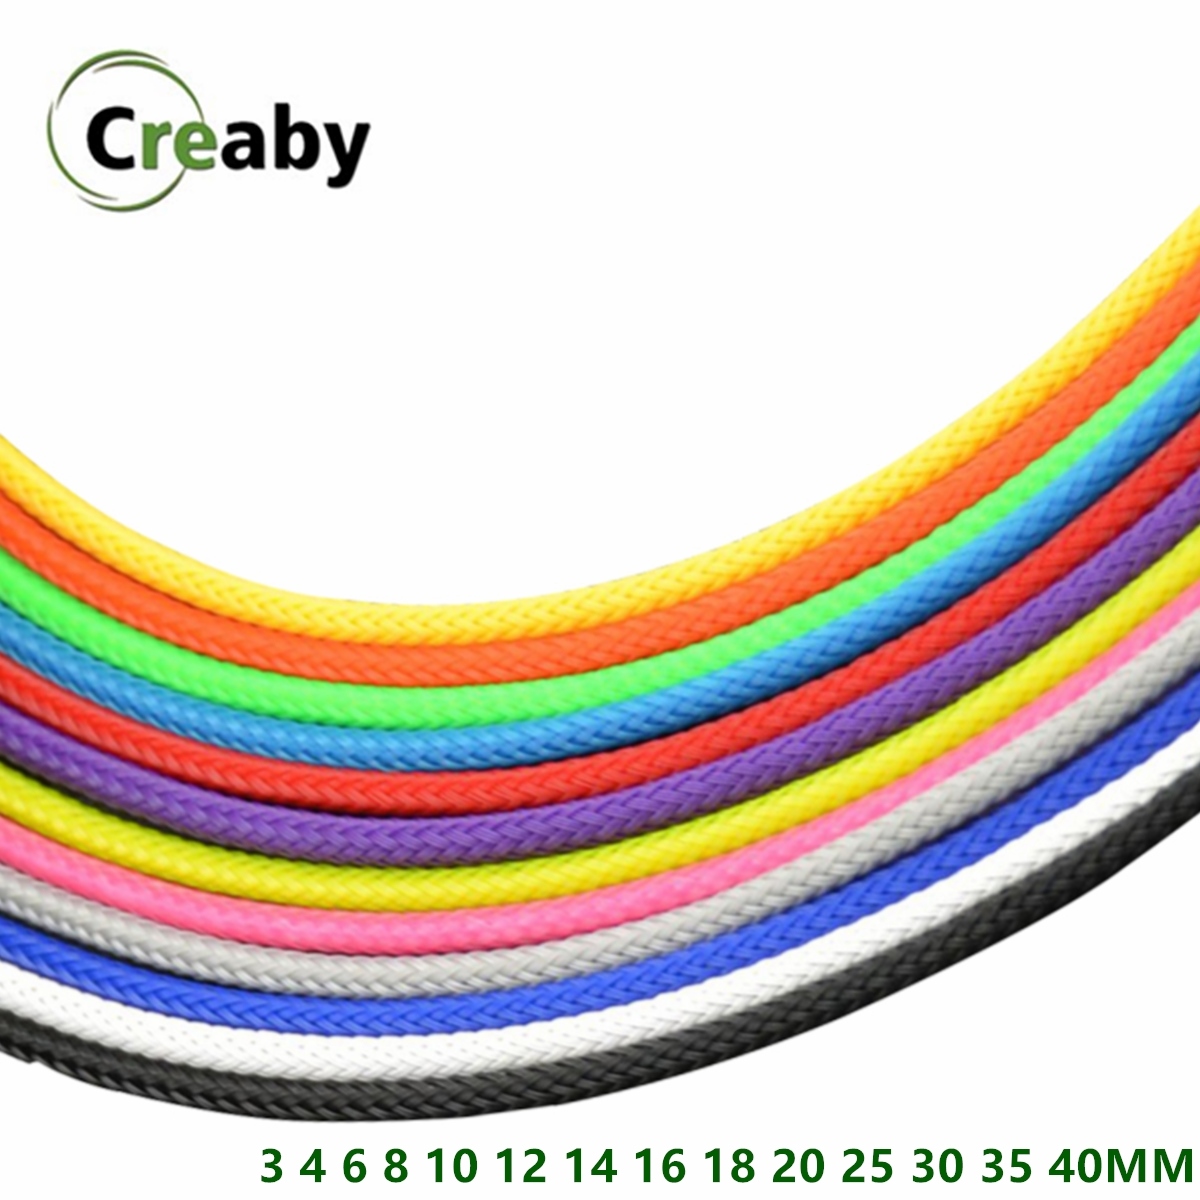 CW Braided Pet Expandable Sleeve Insulated Wire - 1m 3 4 6 8 10 Aliexpress